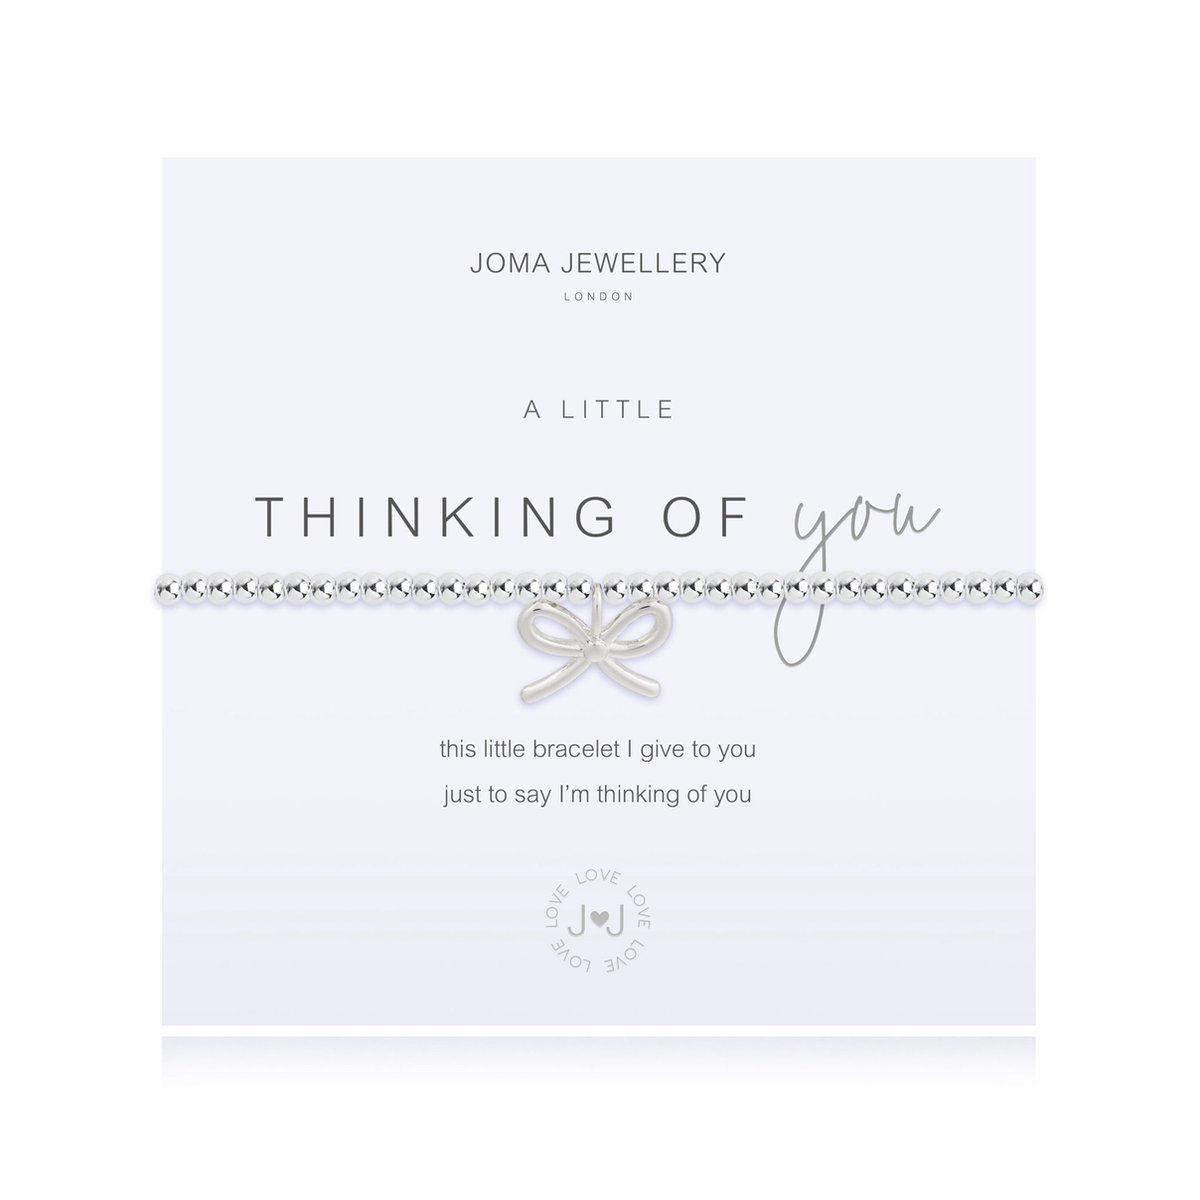 Joma Jewellery - A Little - Thinking of You - Armband